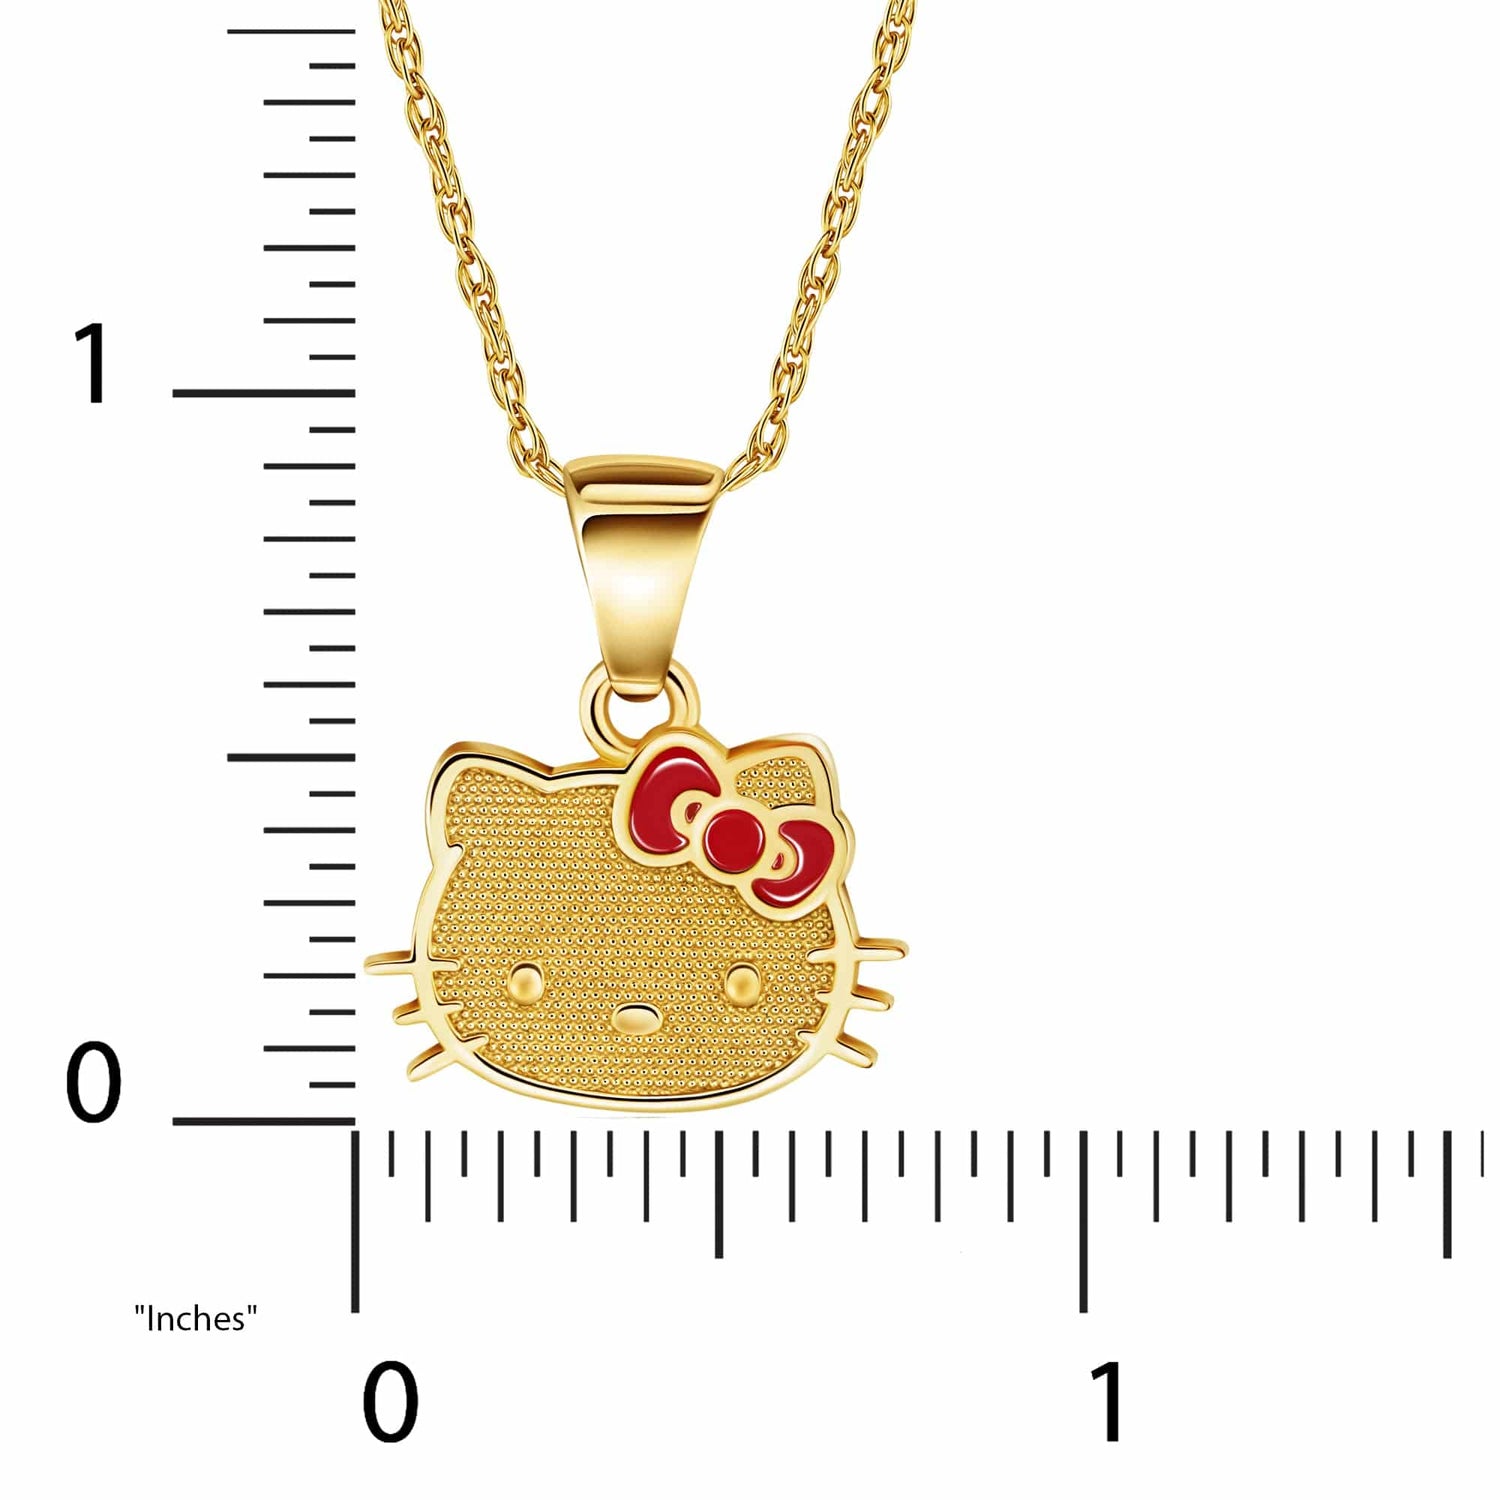 ZARD Hello Kitty Pendant Necklace in Cubic Zirconia Accent Yellow Gold  Plating | eBay